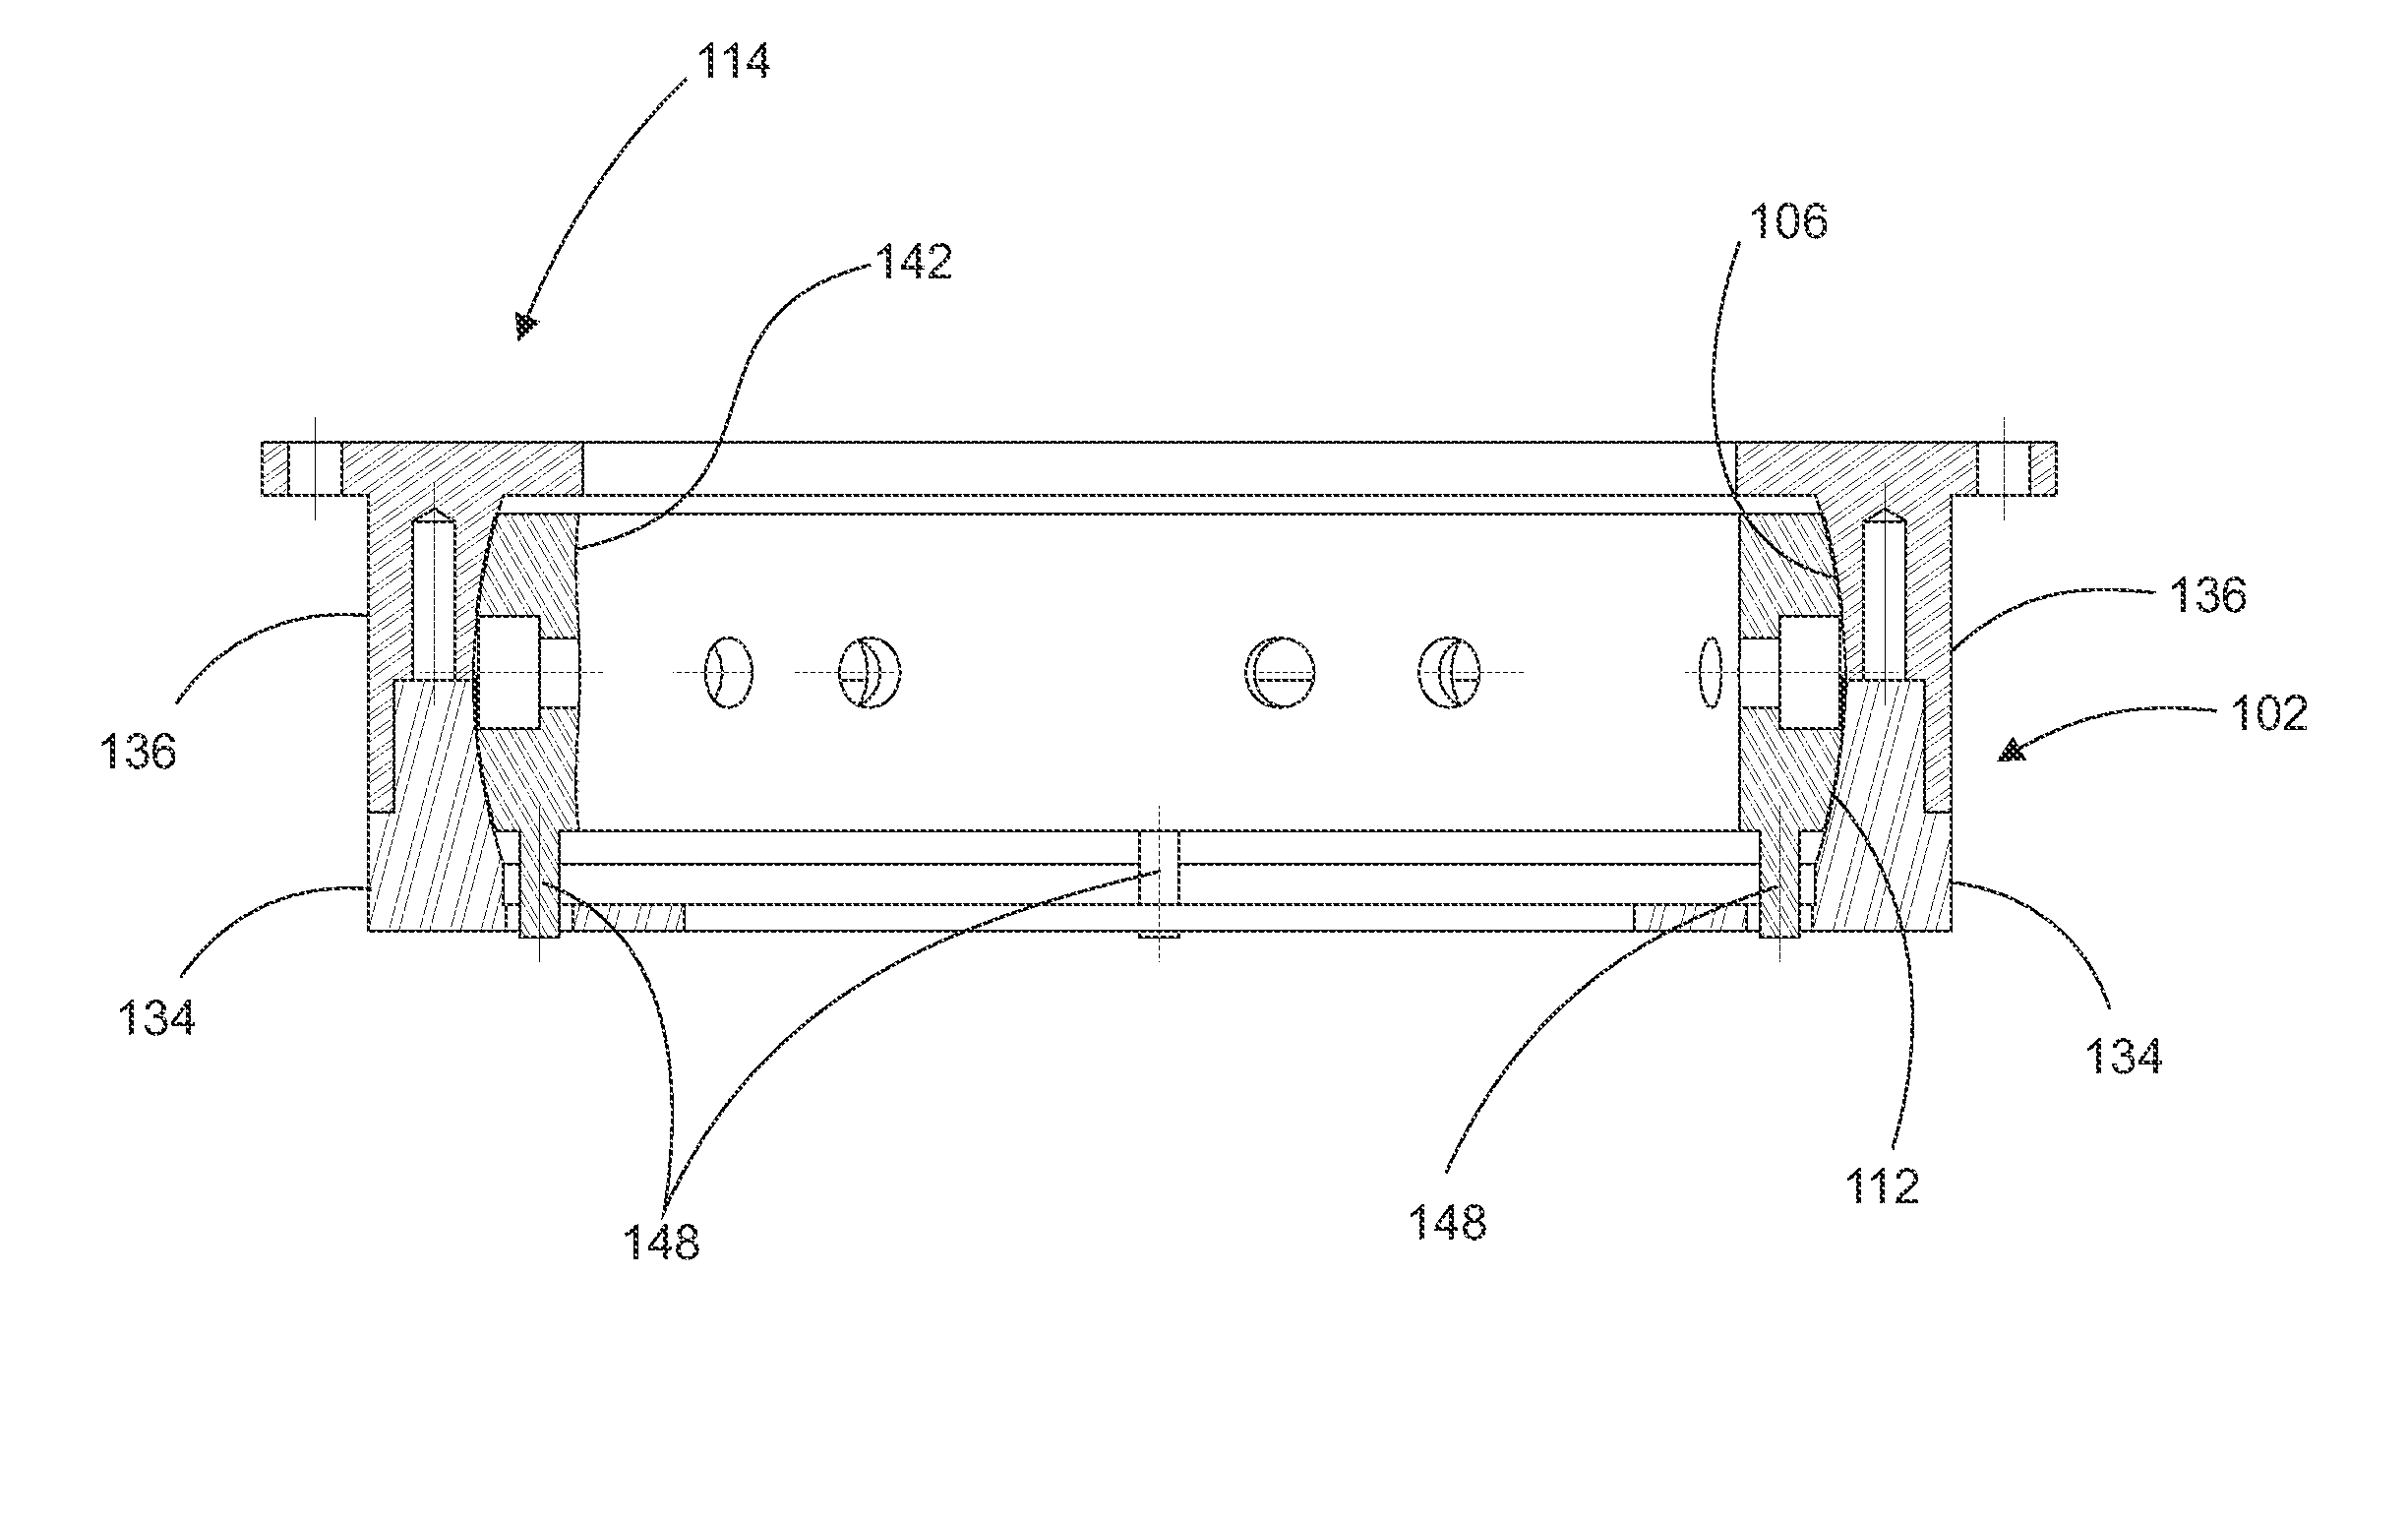 Pdc bearing for use in a fluid environment